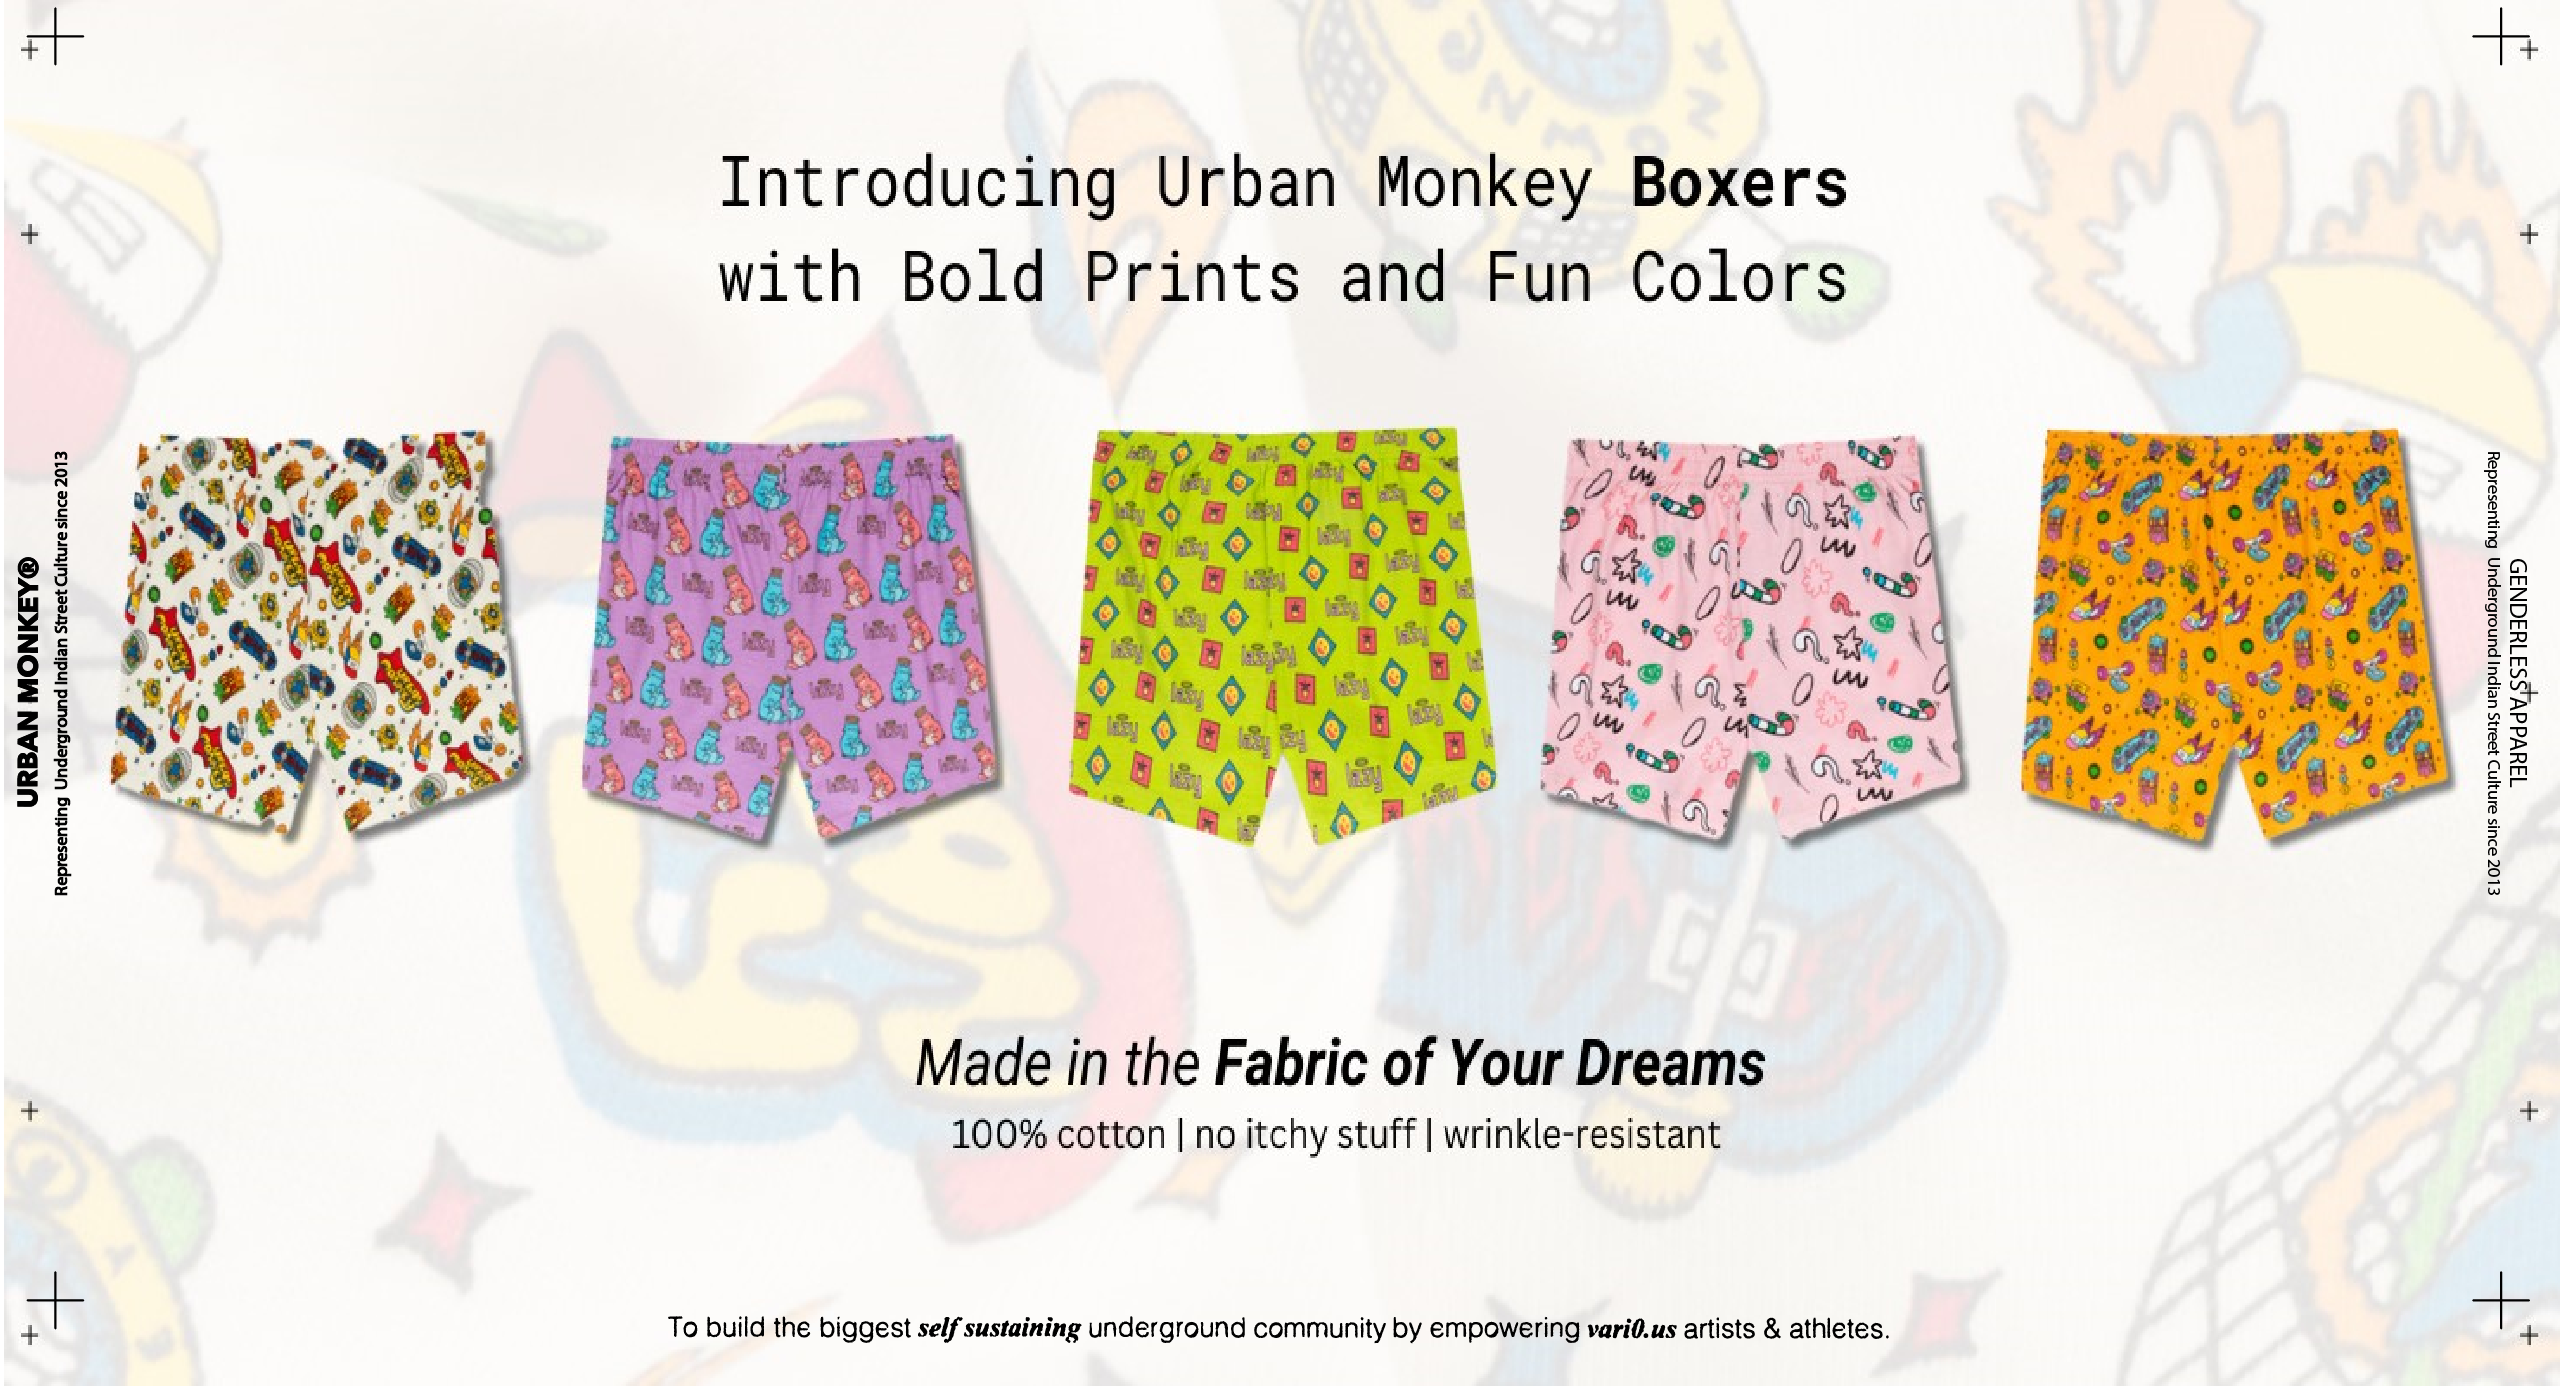 Introducing Urban Monkey Boxers with Bold Prints and Fun Colors